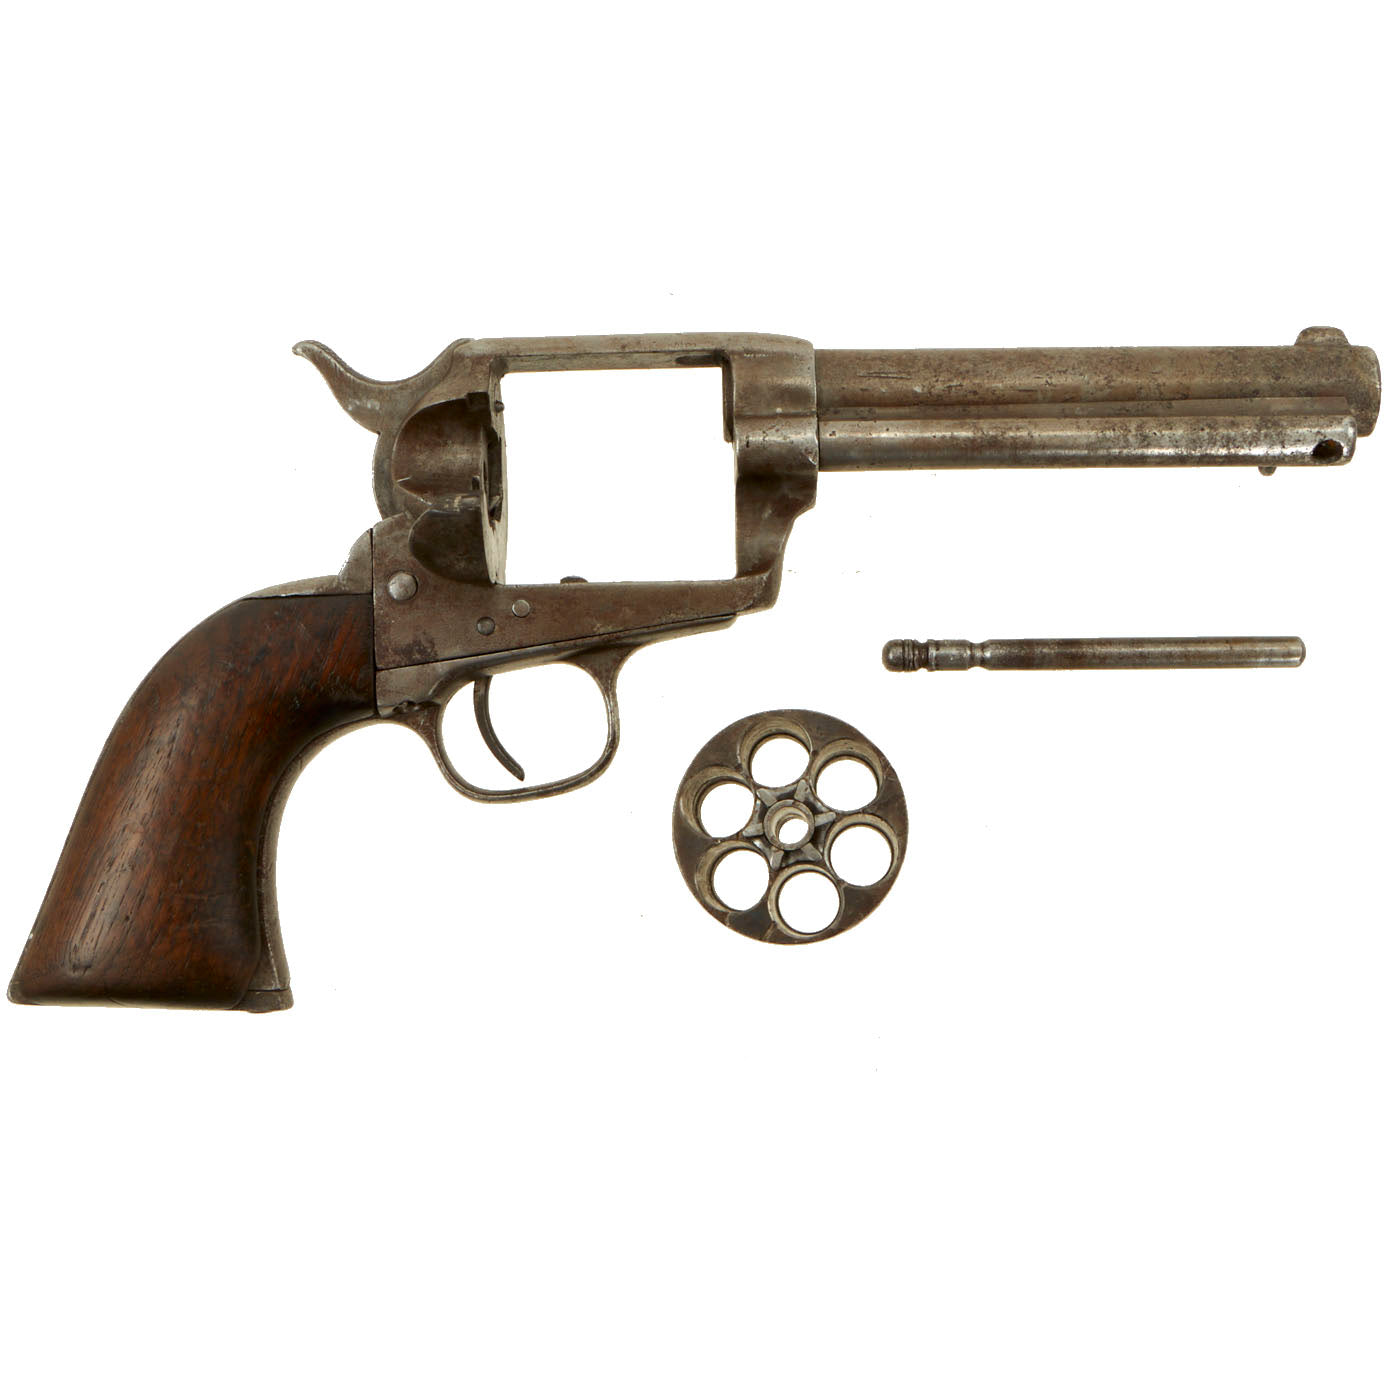 Original U.S. Colt .45cal Single Action Army Revolver with 4 3/4 Barr –  International Military Antiques